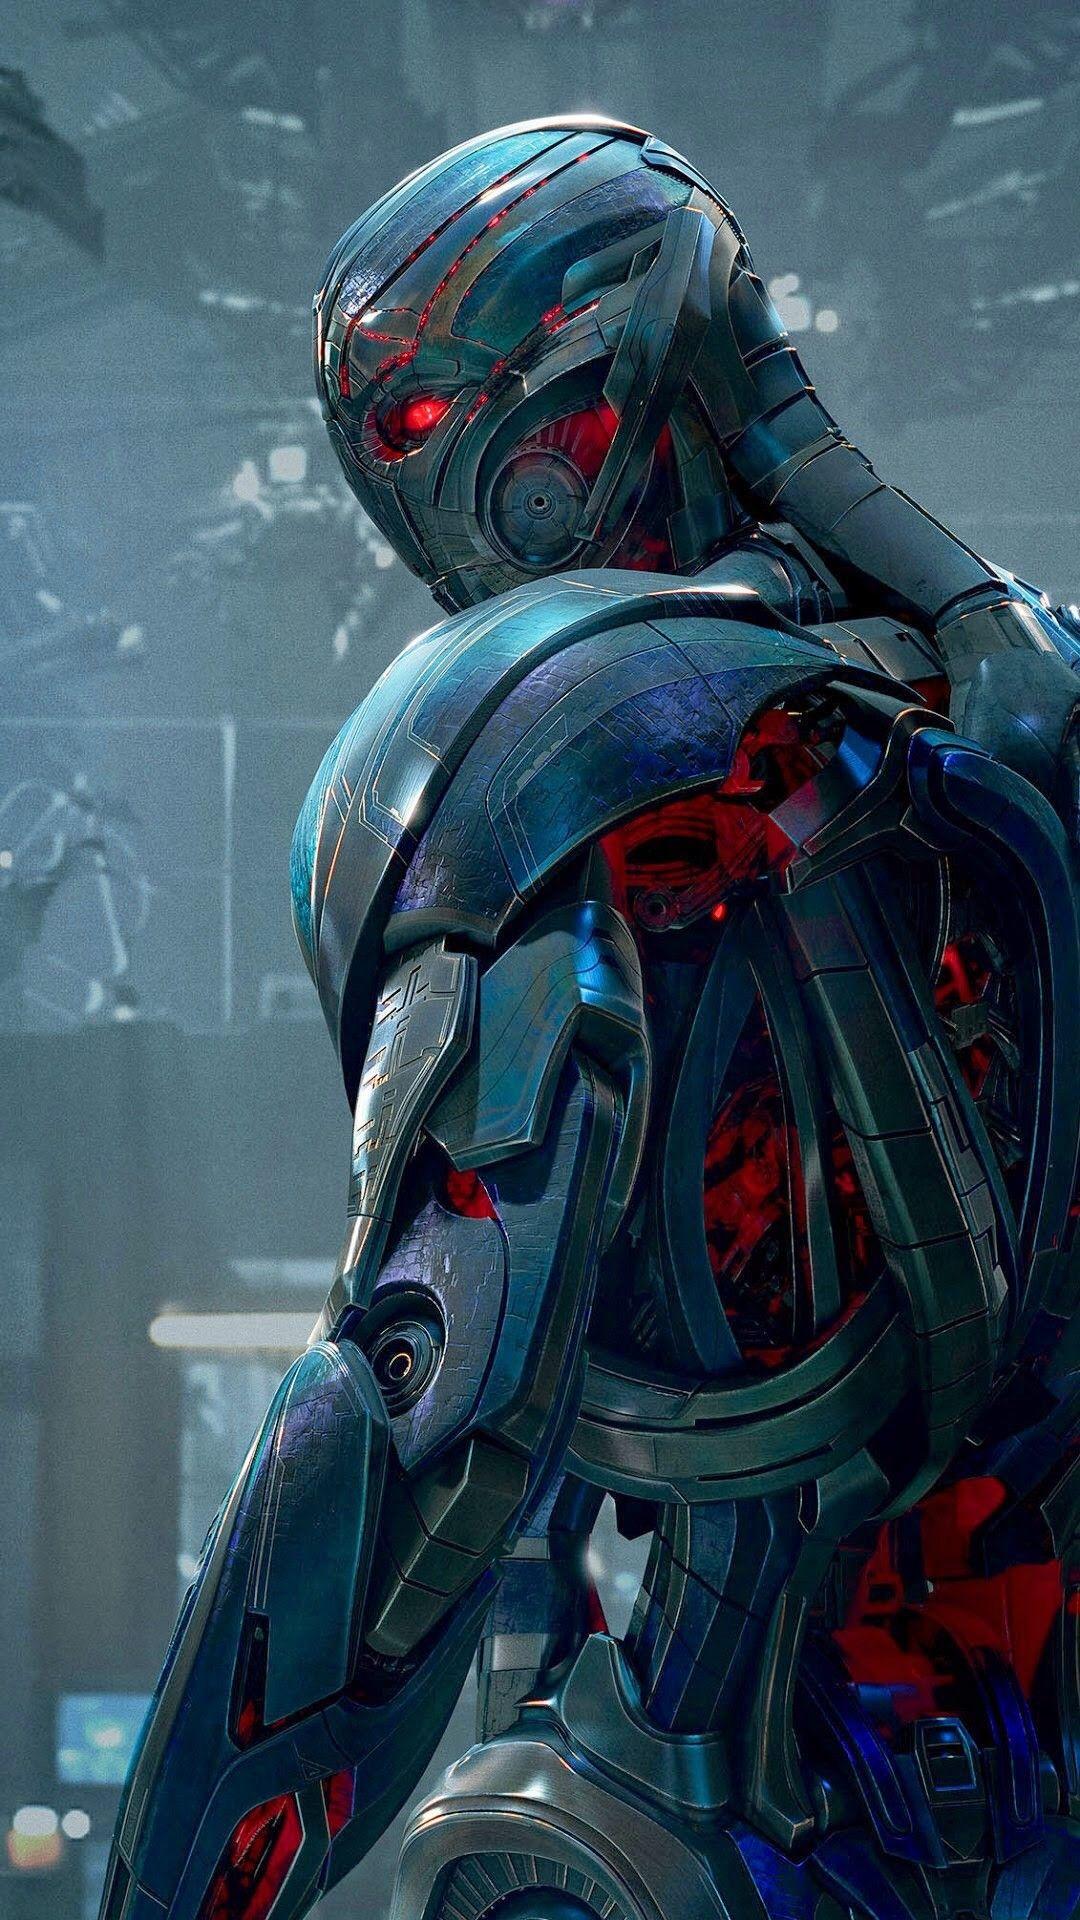 Ultron to see Avengers: Age of Ultron Apple iPhone HD Wallpaper Collection villain. Marvel villains, Marvel wallpaper, Marvel